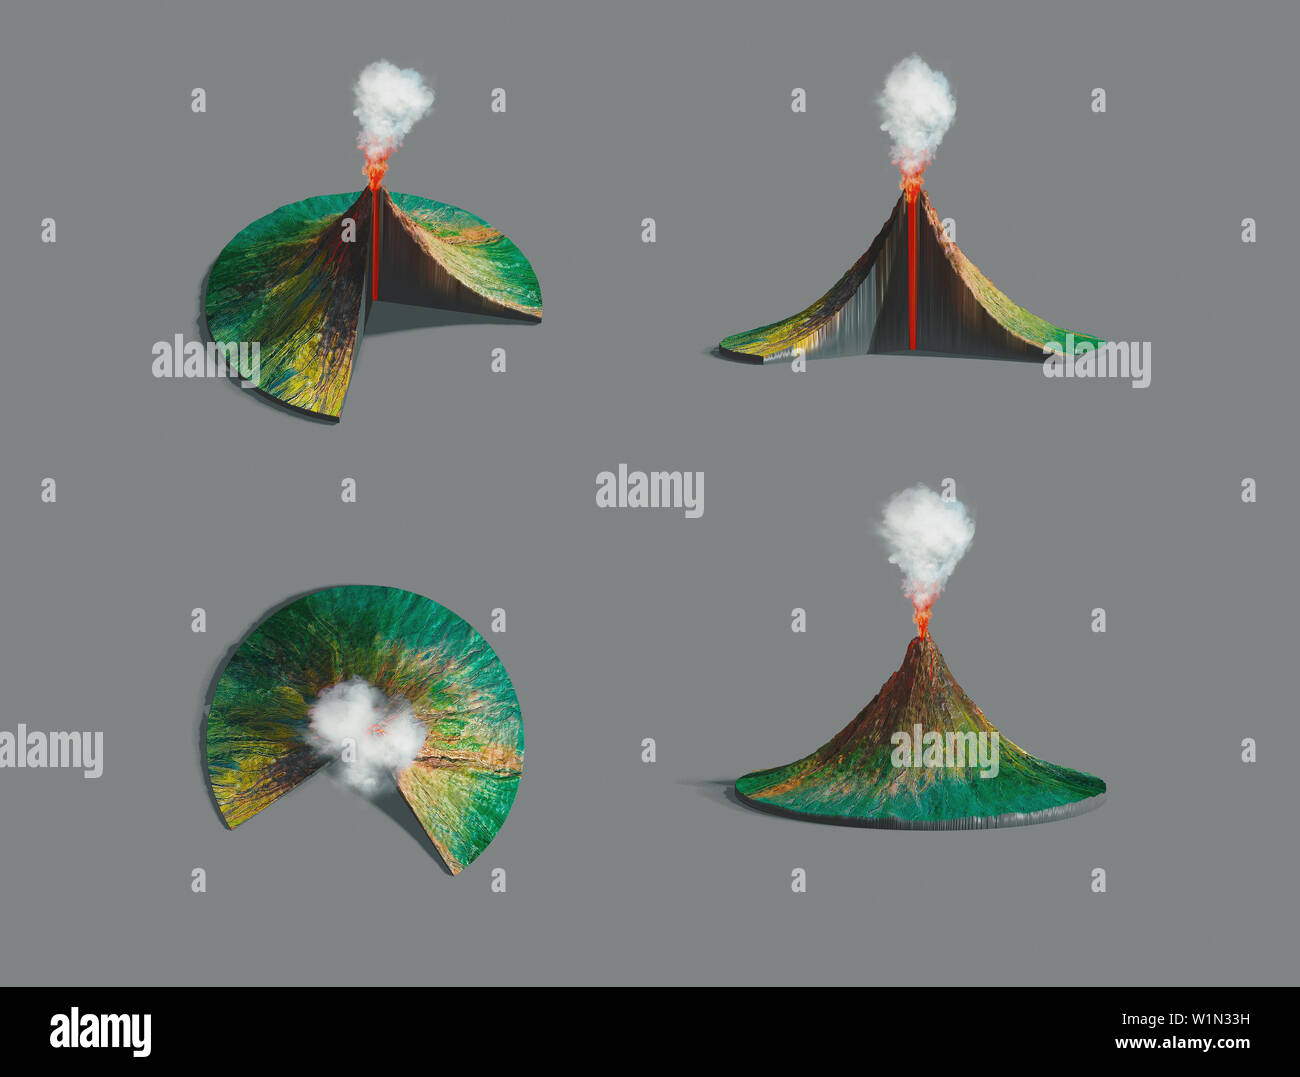 Volcano structure. Original hand painted illustration, 3d rendering Stock Photo